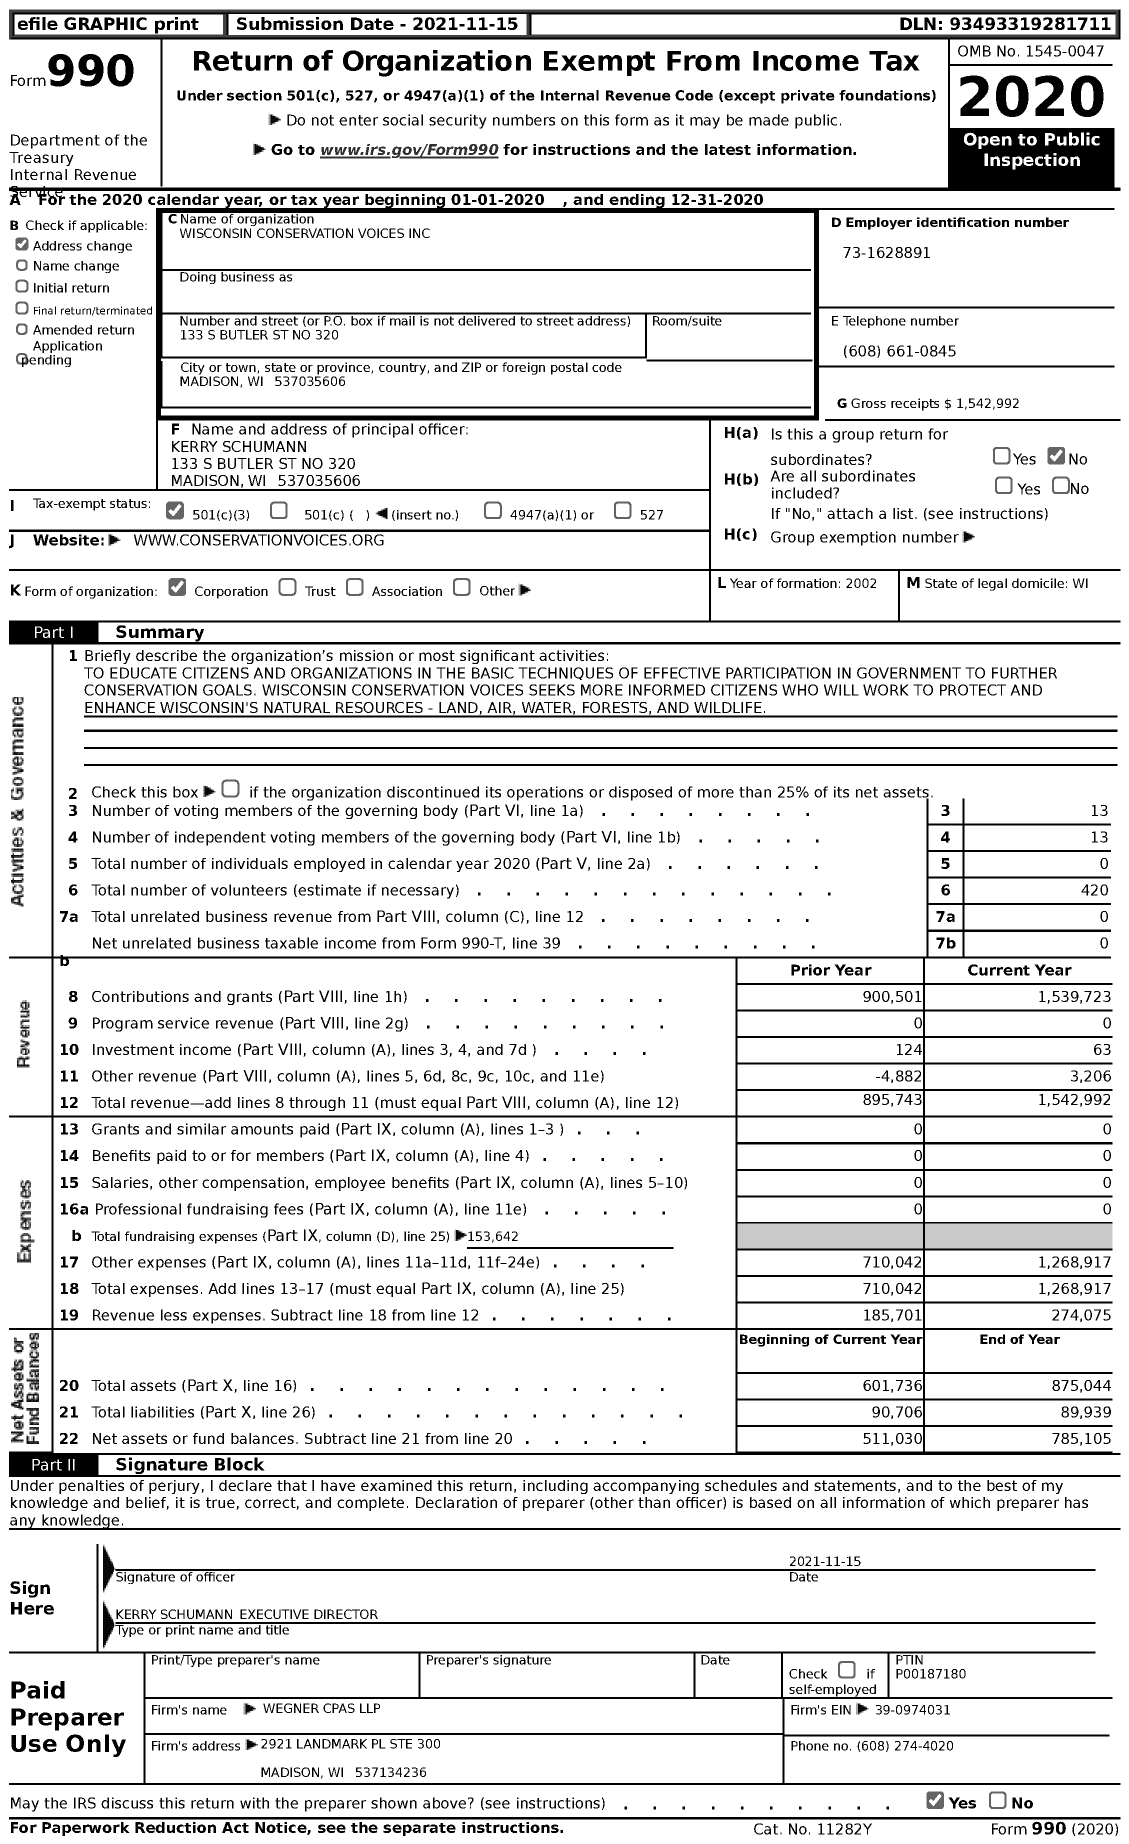 Image of first page of 2020 Form 990 for Wisconsin Conservation Voices